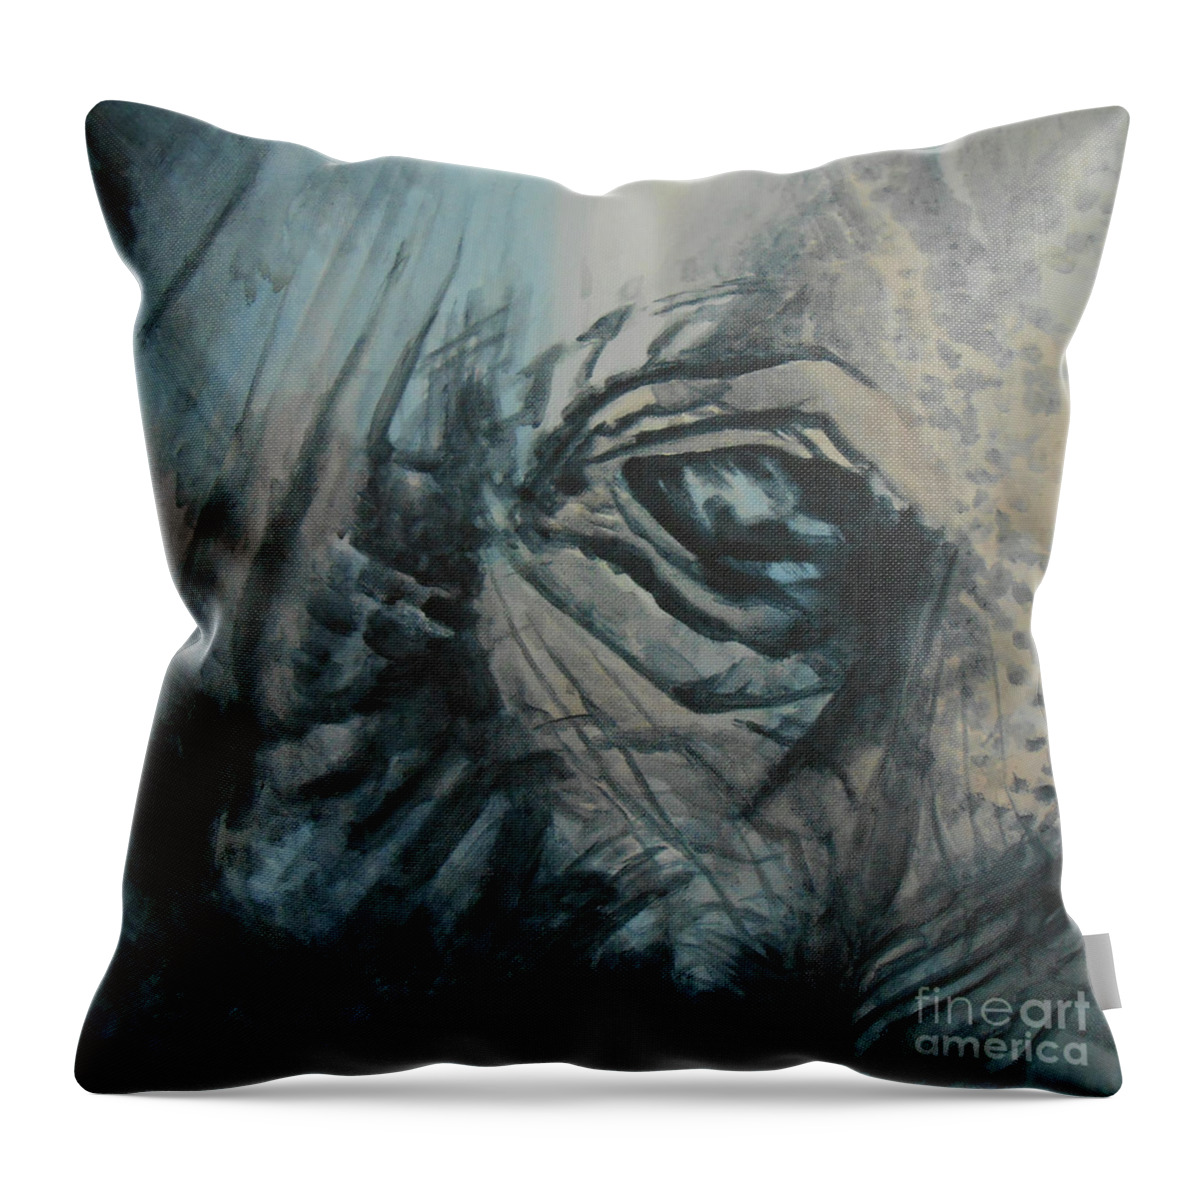 Elephant Throw Pillow featuring the painting The Incredible - Elephant by Jane See